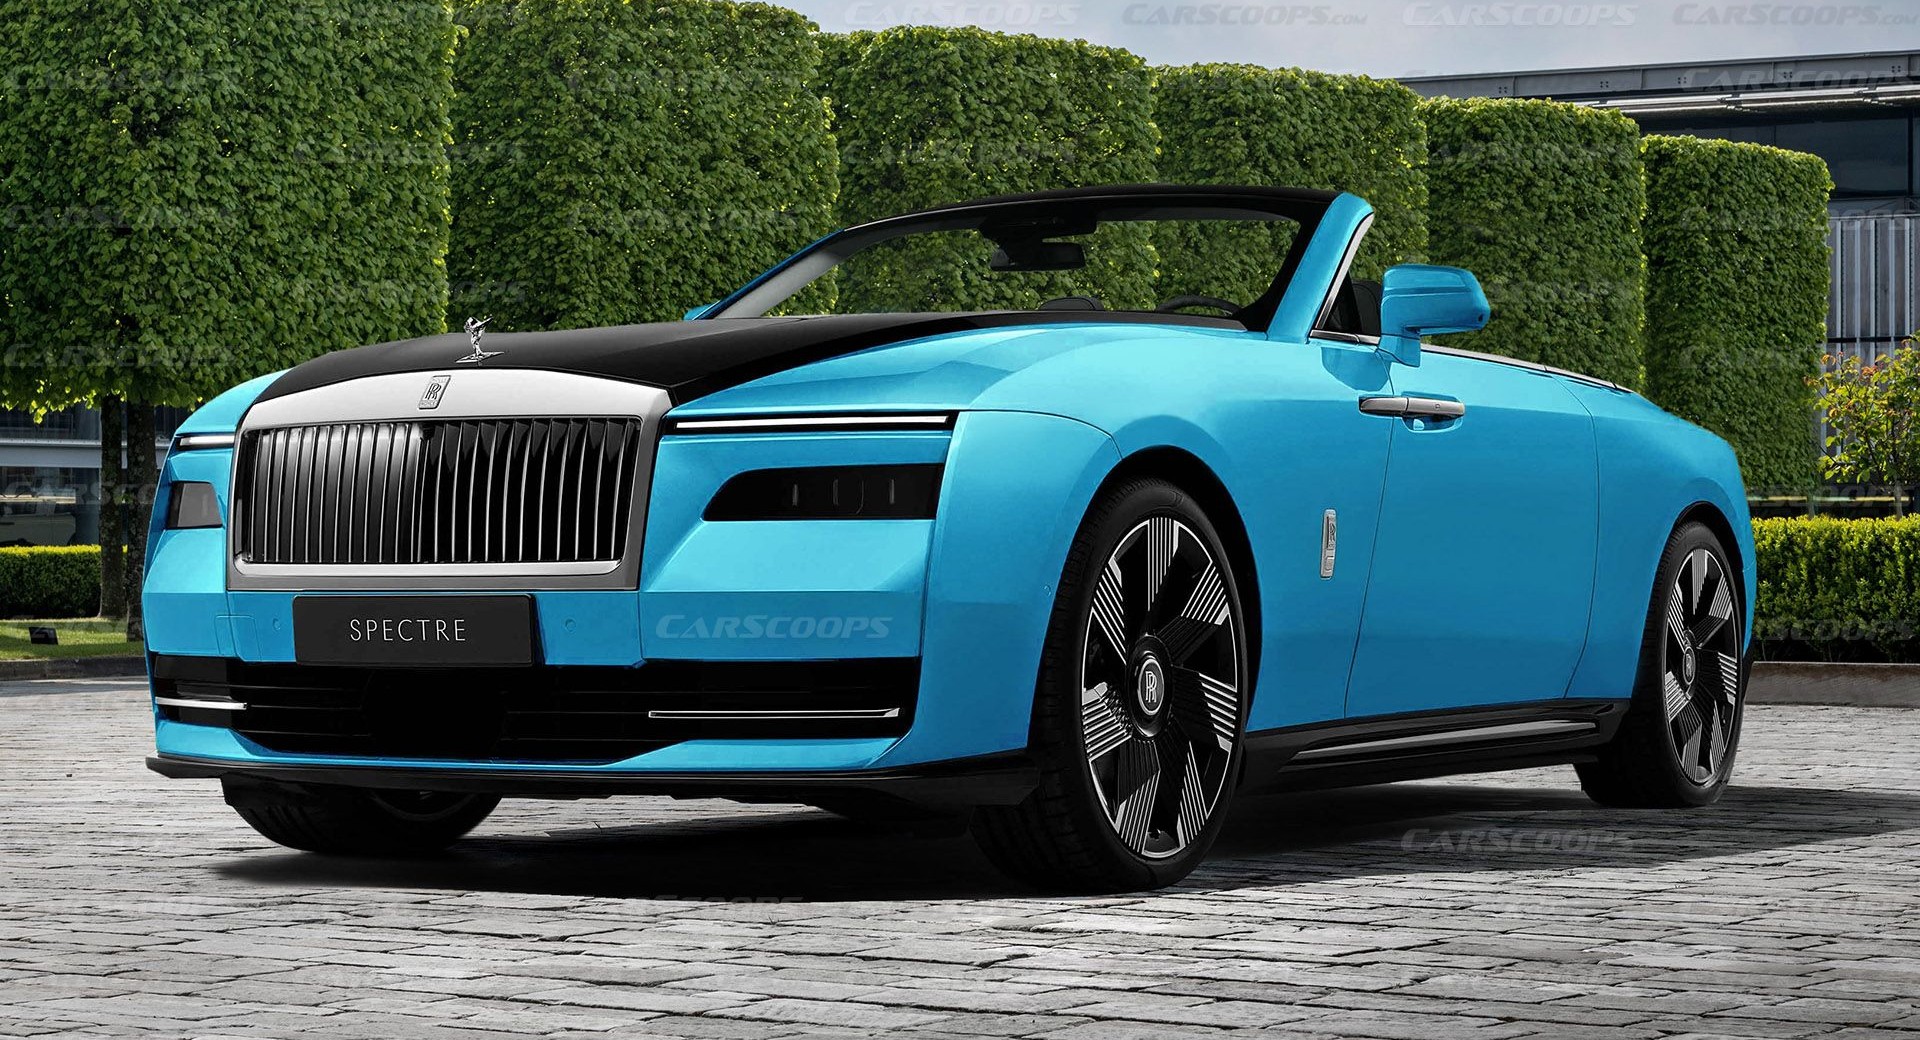 New RollsRoyce convertible Dawn delivers superluxurious effortless  experience